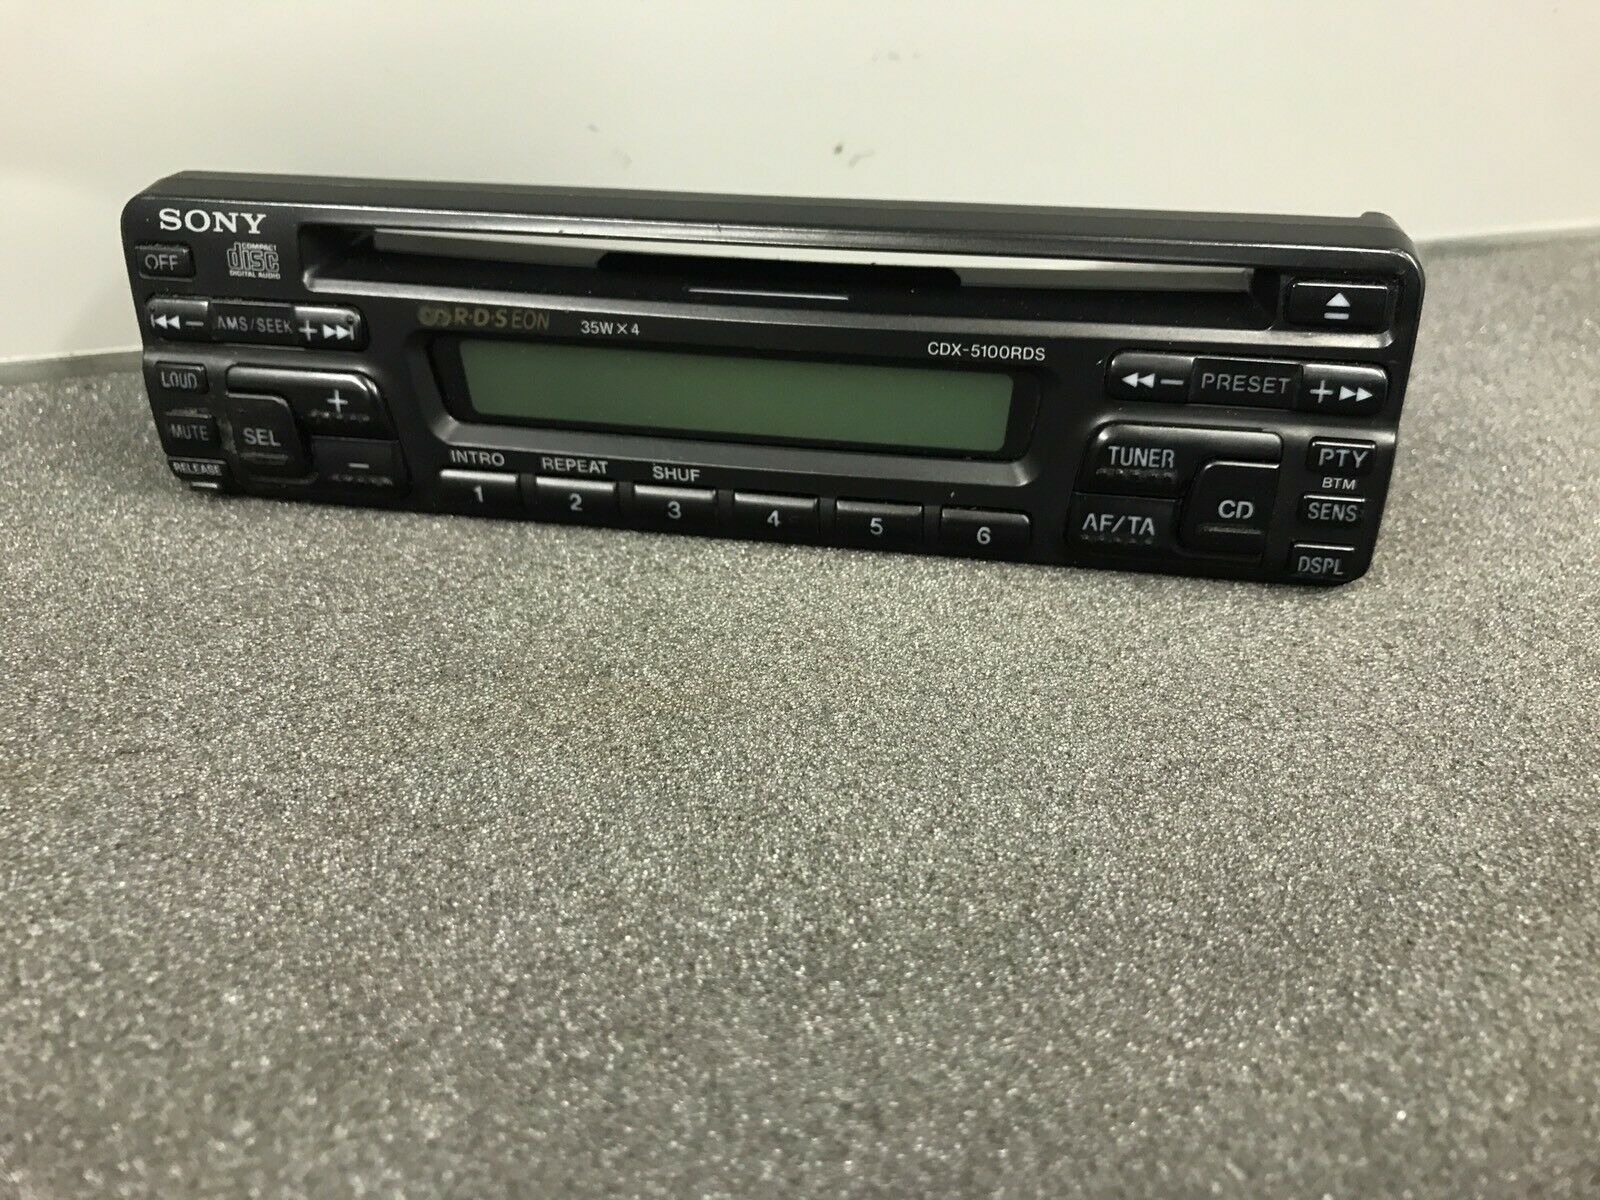 Sony Cdx-5100rds Car Radio Stereo Face Front Panel complete Cdx5100rds